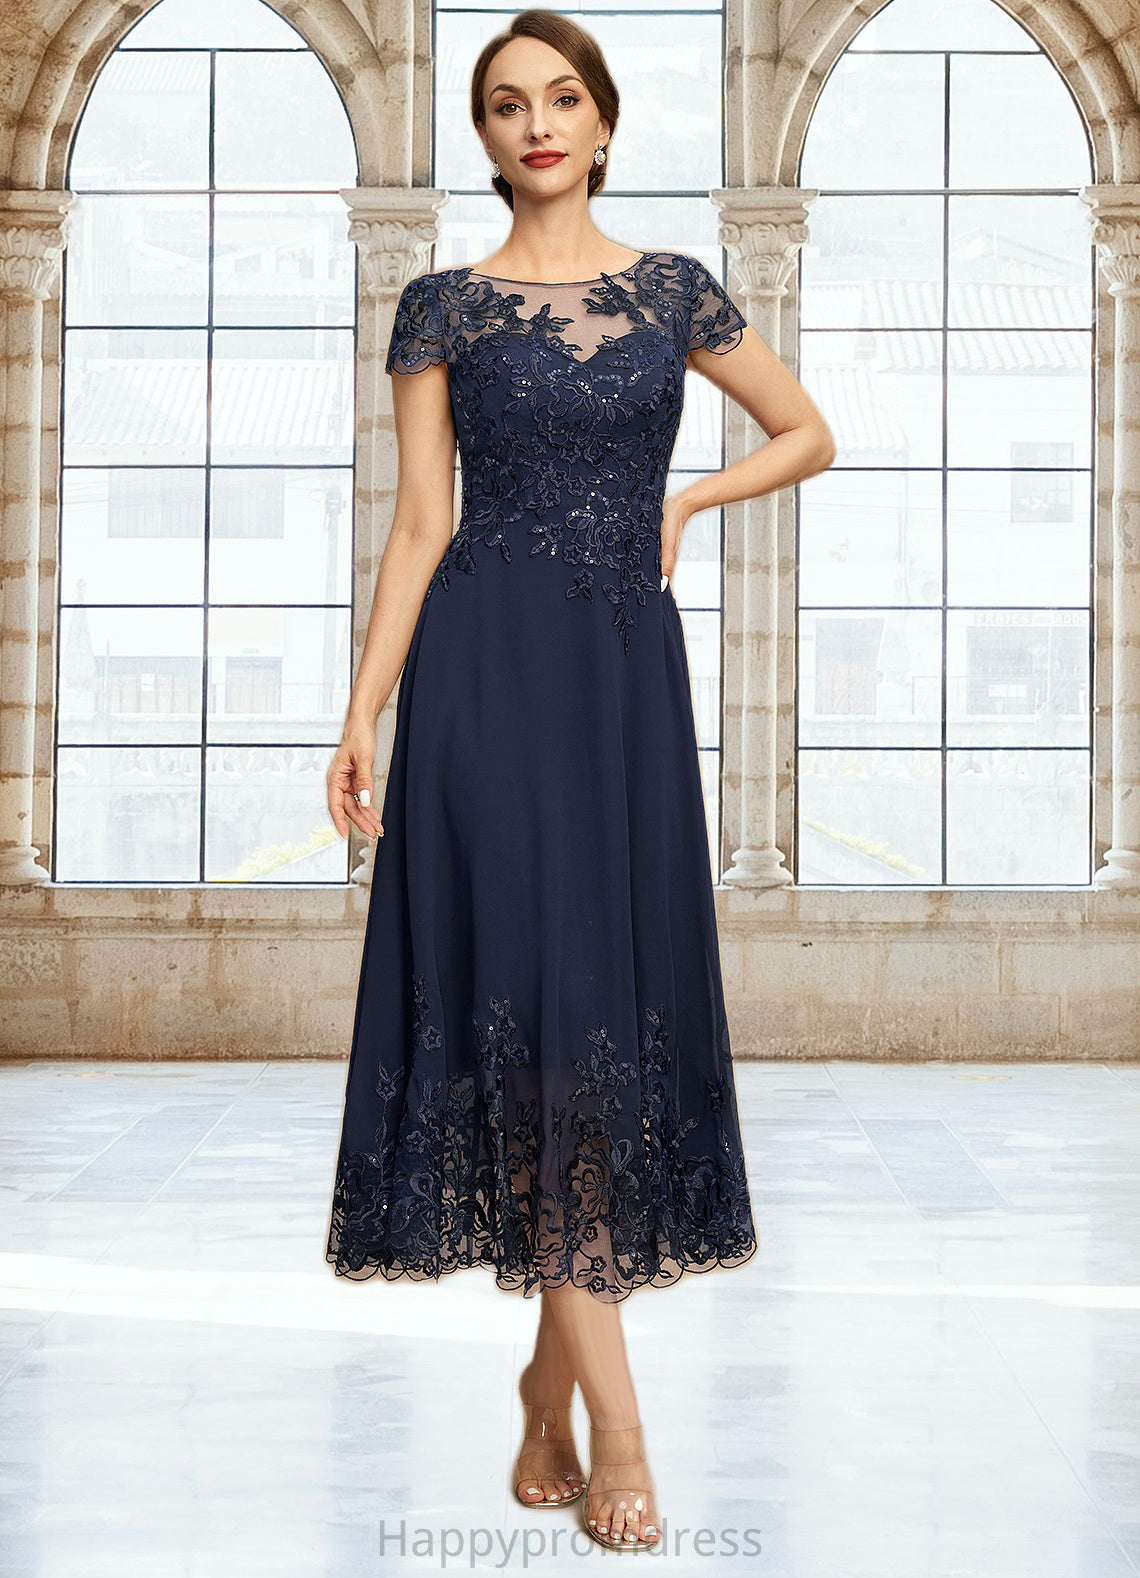 Chloe A-line Scoop Illusion Tea-Length Chiffon Lace Mother of the Bride Dress With Sequins XXSP0021664